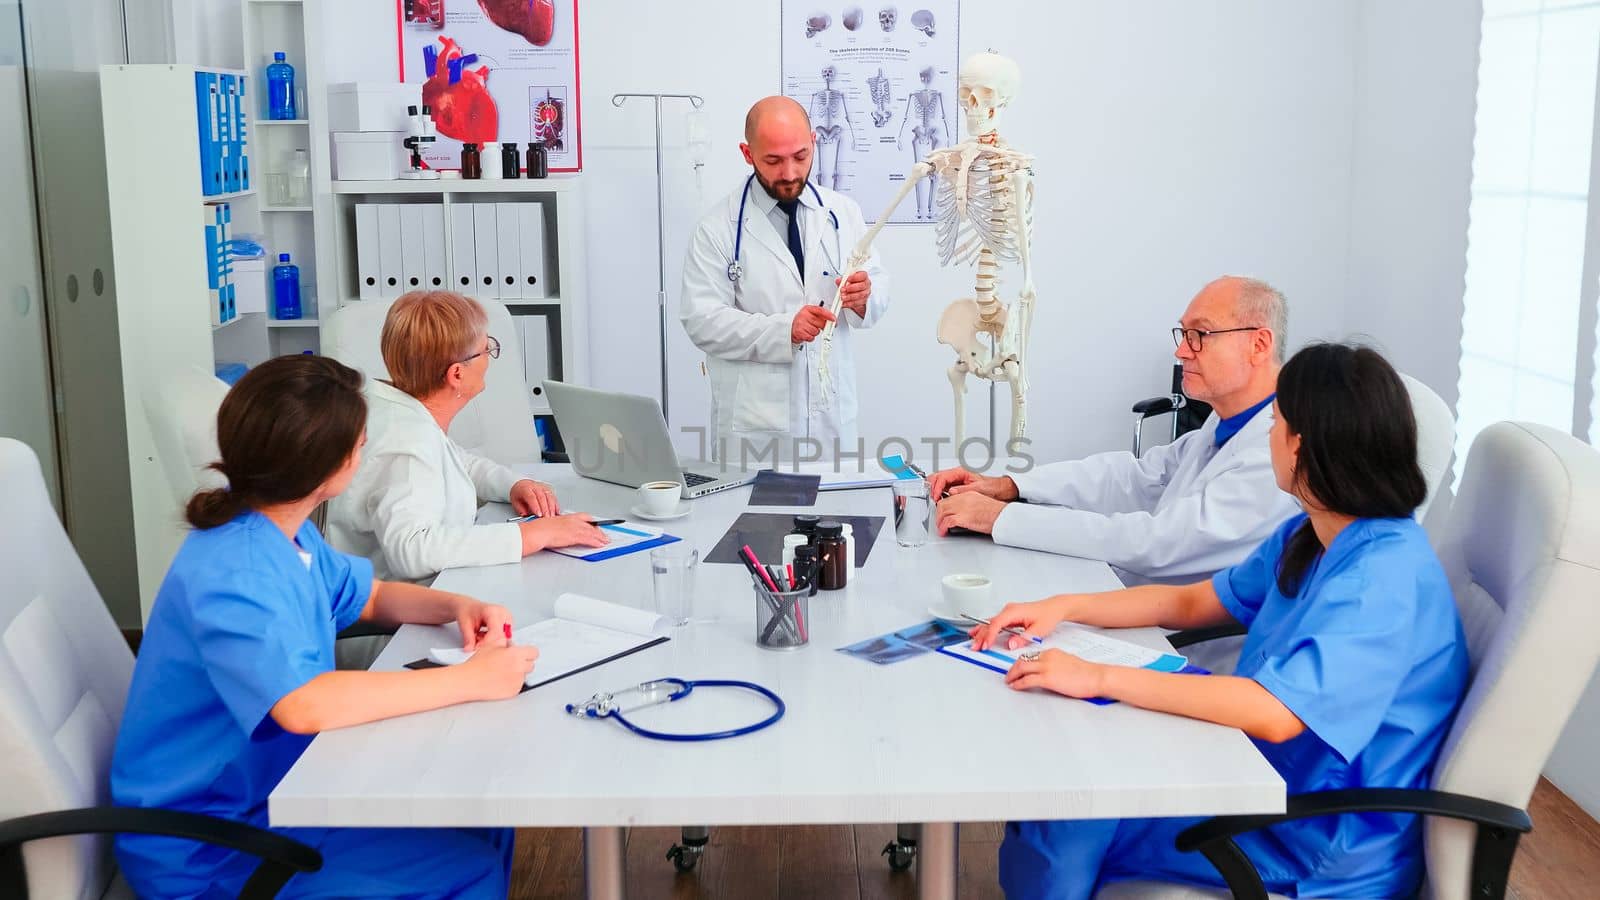 Expert doctor holding radiography during medical seminar for medical staff in conference room using human skeleton model. Clinic therapist talking with colleagues about disease, medicine professional